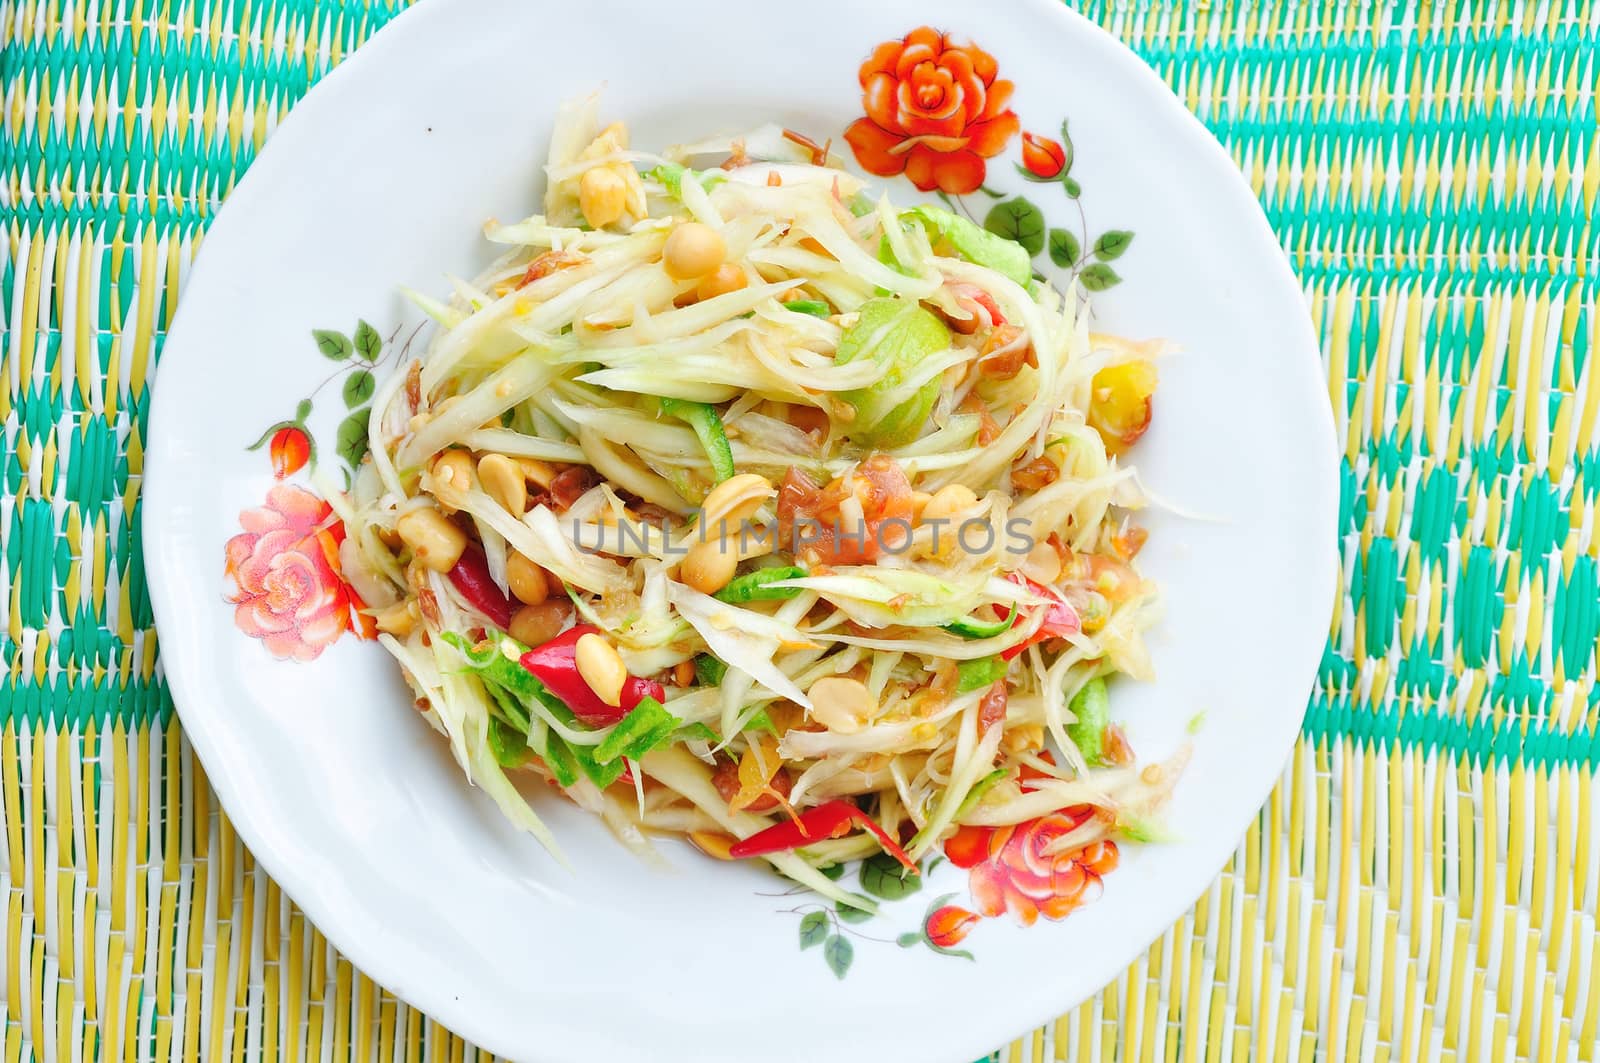 Green papaya salad Thai cuisine spicy delicious by thampapon